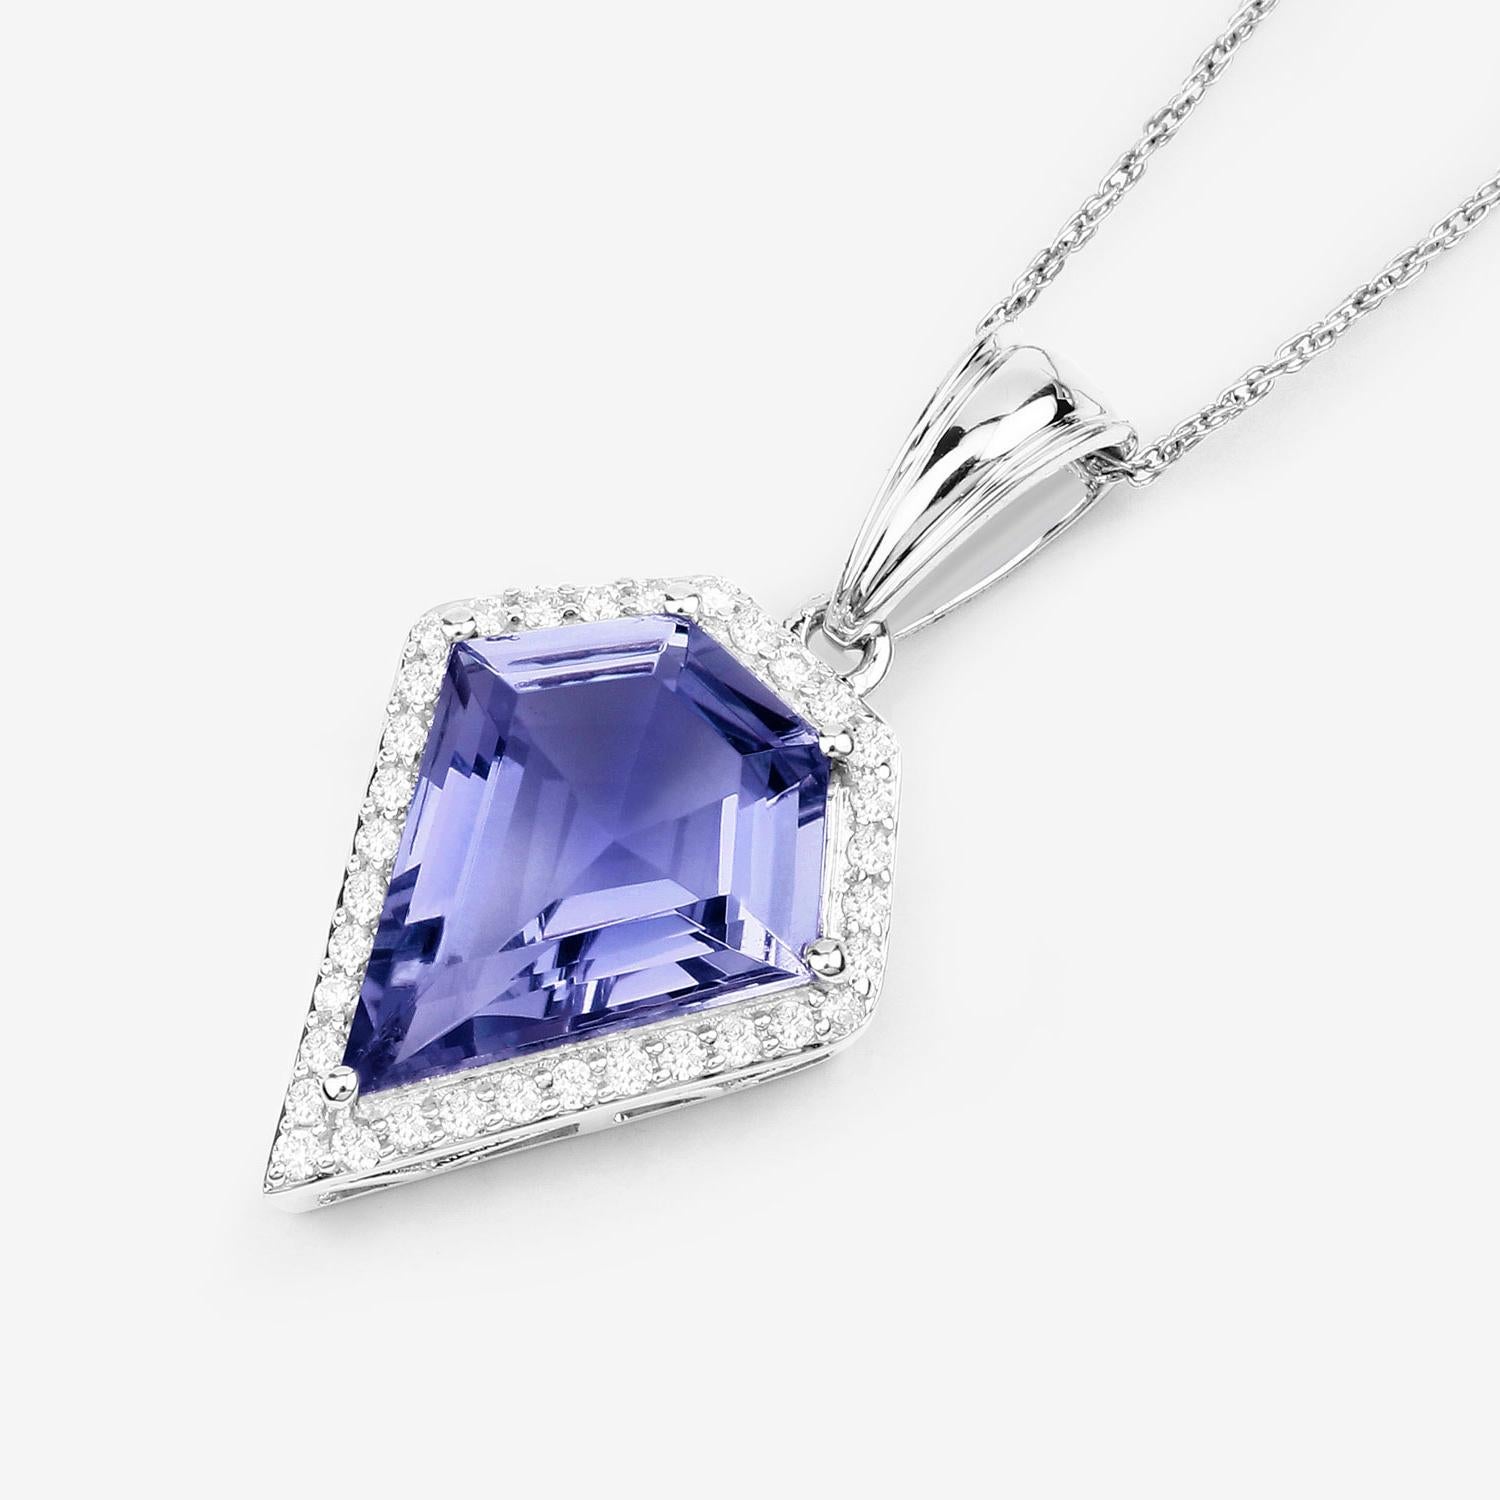 Shield Cut Iolite Pendant Necklace With Diamonds 4.65 Carats 14K White Gold For Sale